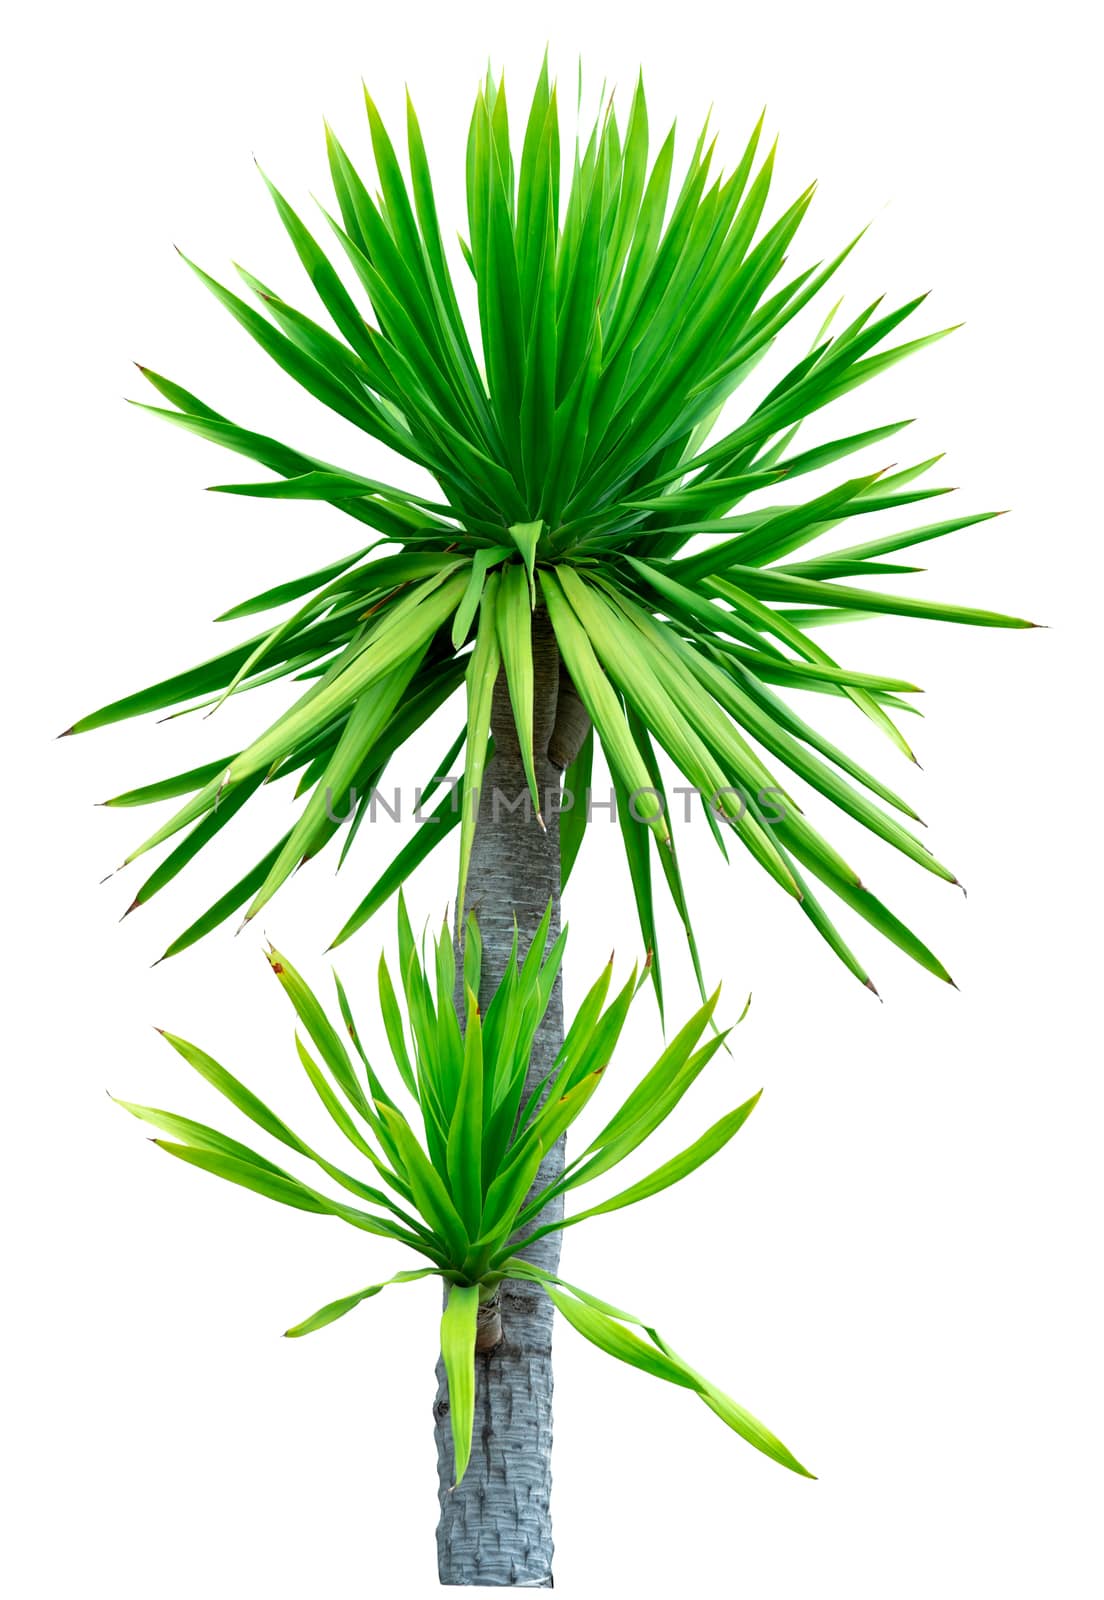 Dracaena cochinchinensis isolated on white background. Tree with green leaves. Ornamental plants for garden decoration. Shrub plants. Subtropical. Non-palm foliage.